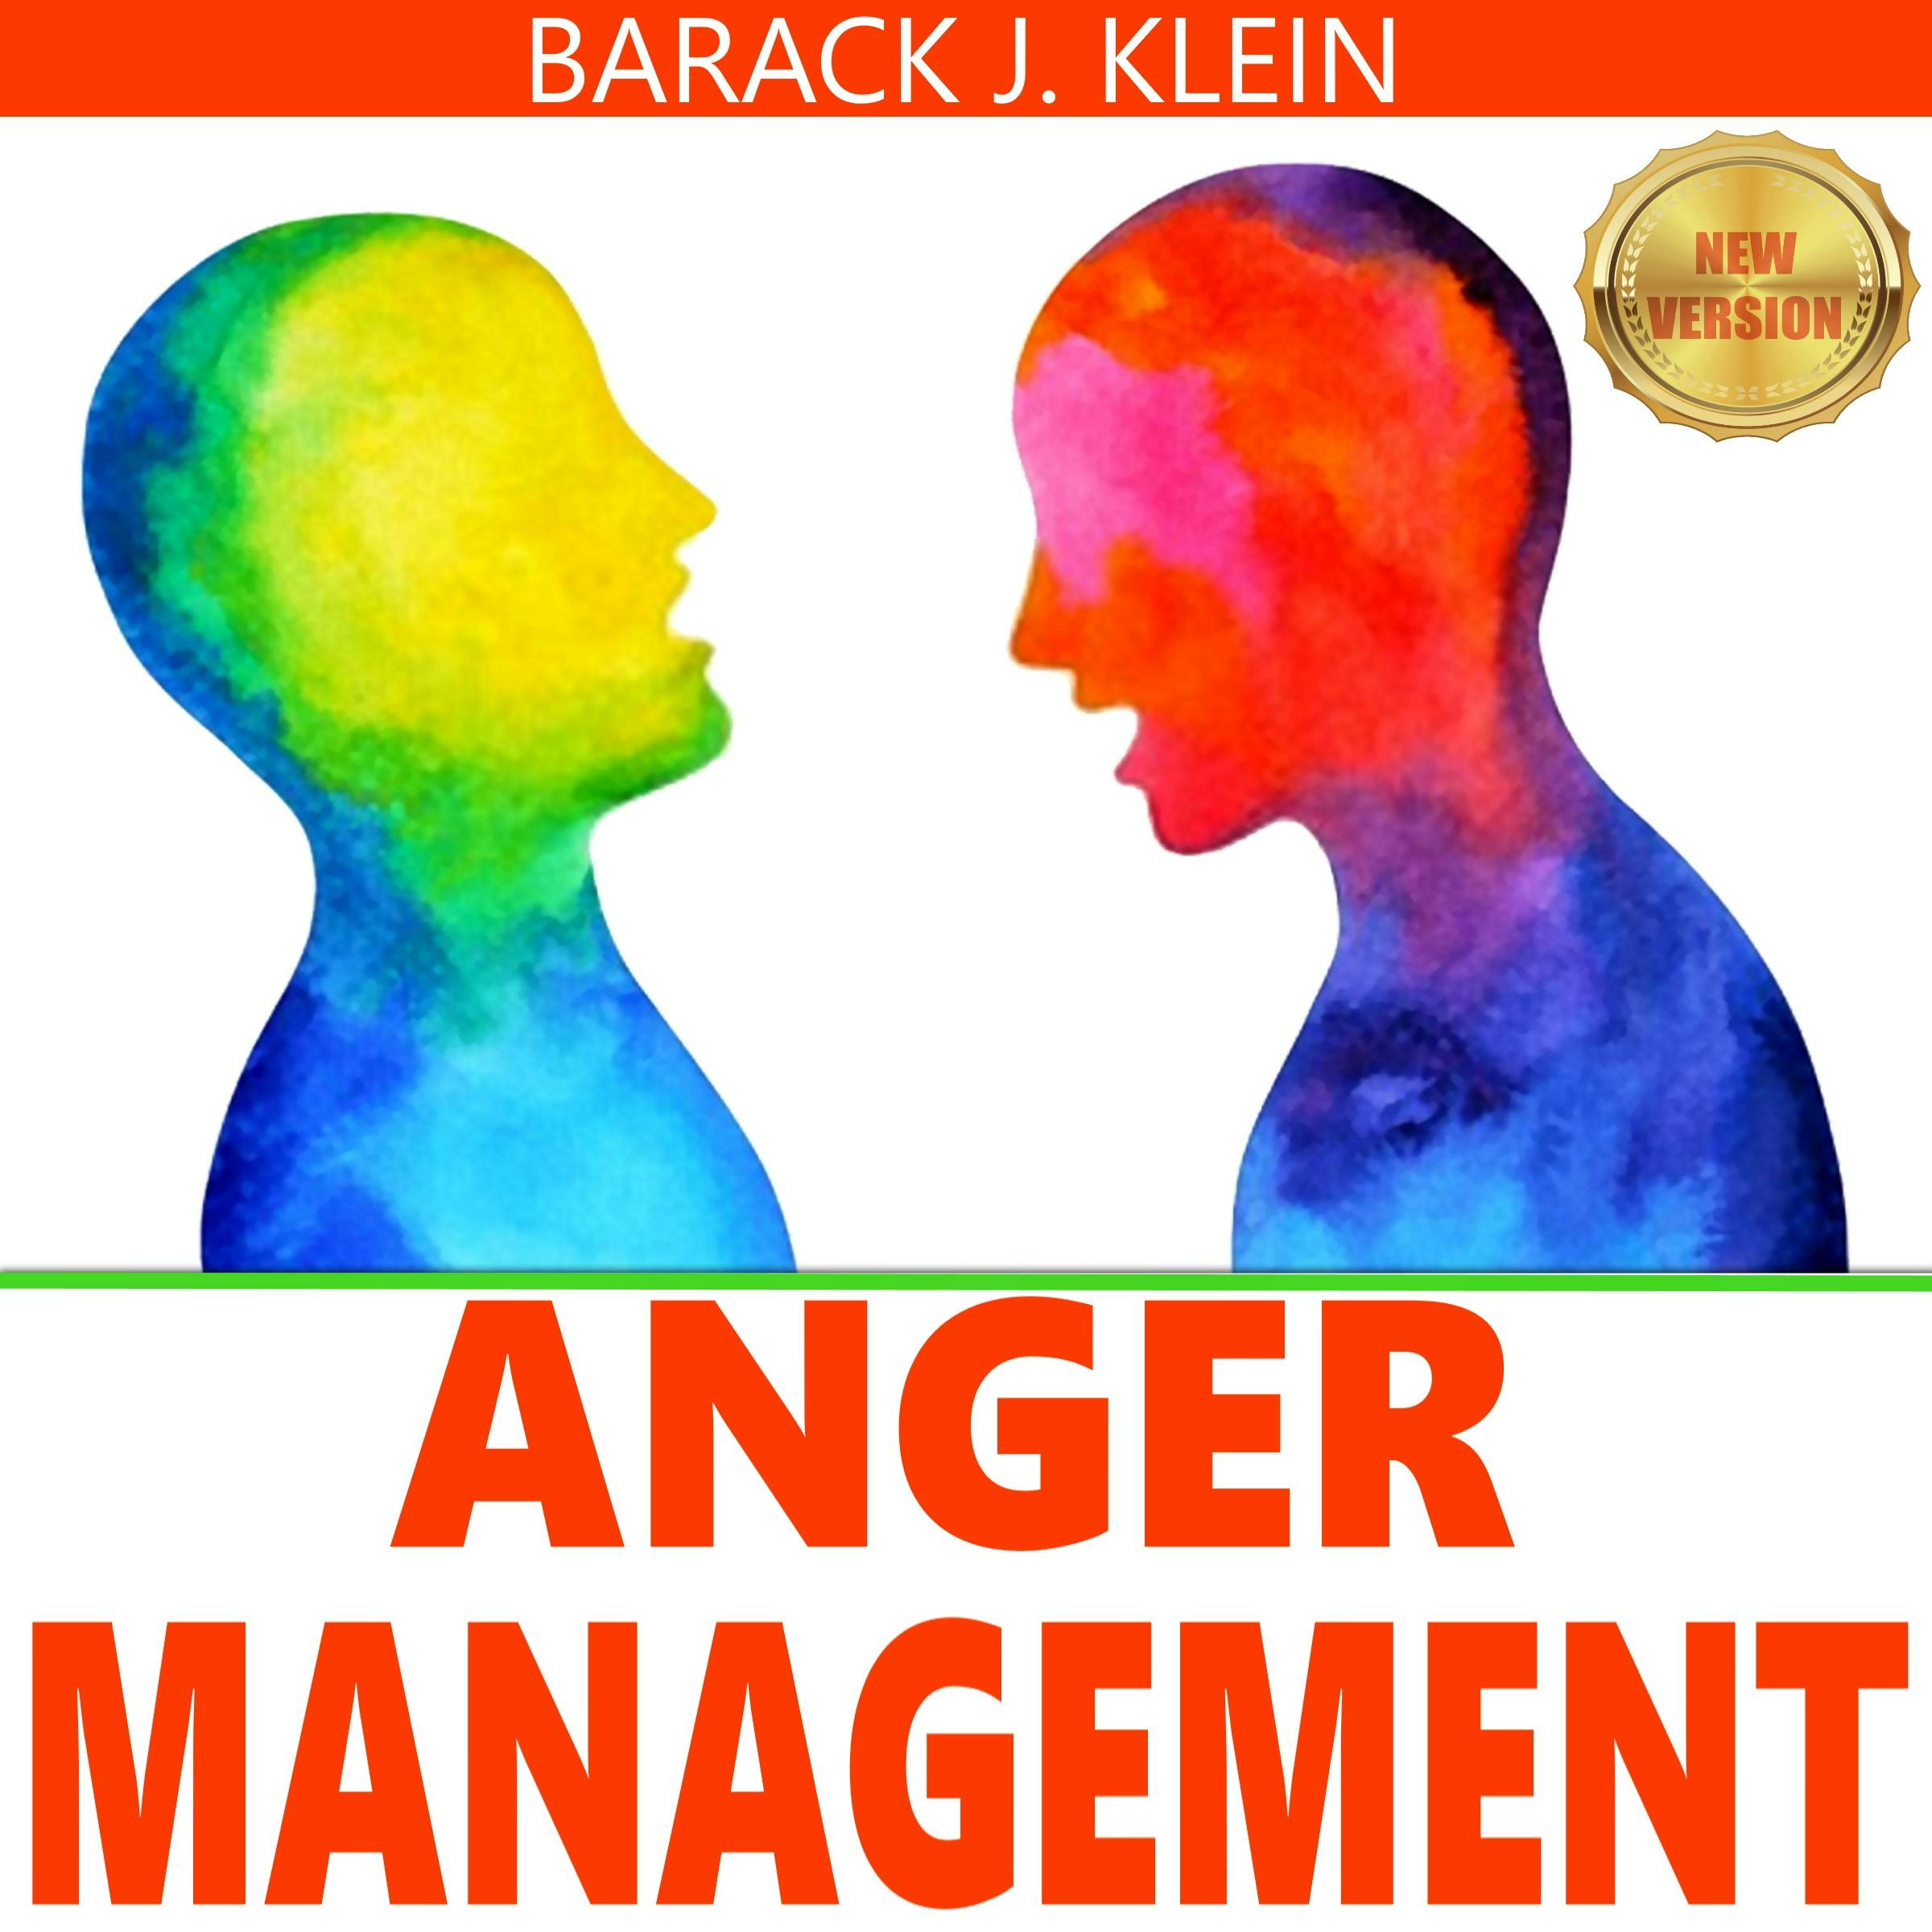 ANGER MANAGEMENT: A Direct Path Through Control of Your Emotions, Learn to Recognize and Control Anger. Overcome Depression & Anxiety. Stress Relief & Take Control of Your Life. NEW VERSION - undefined